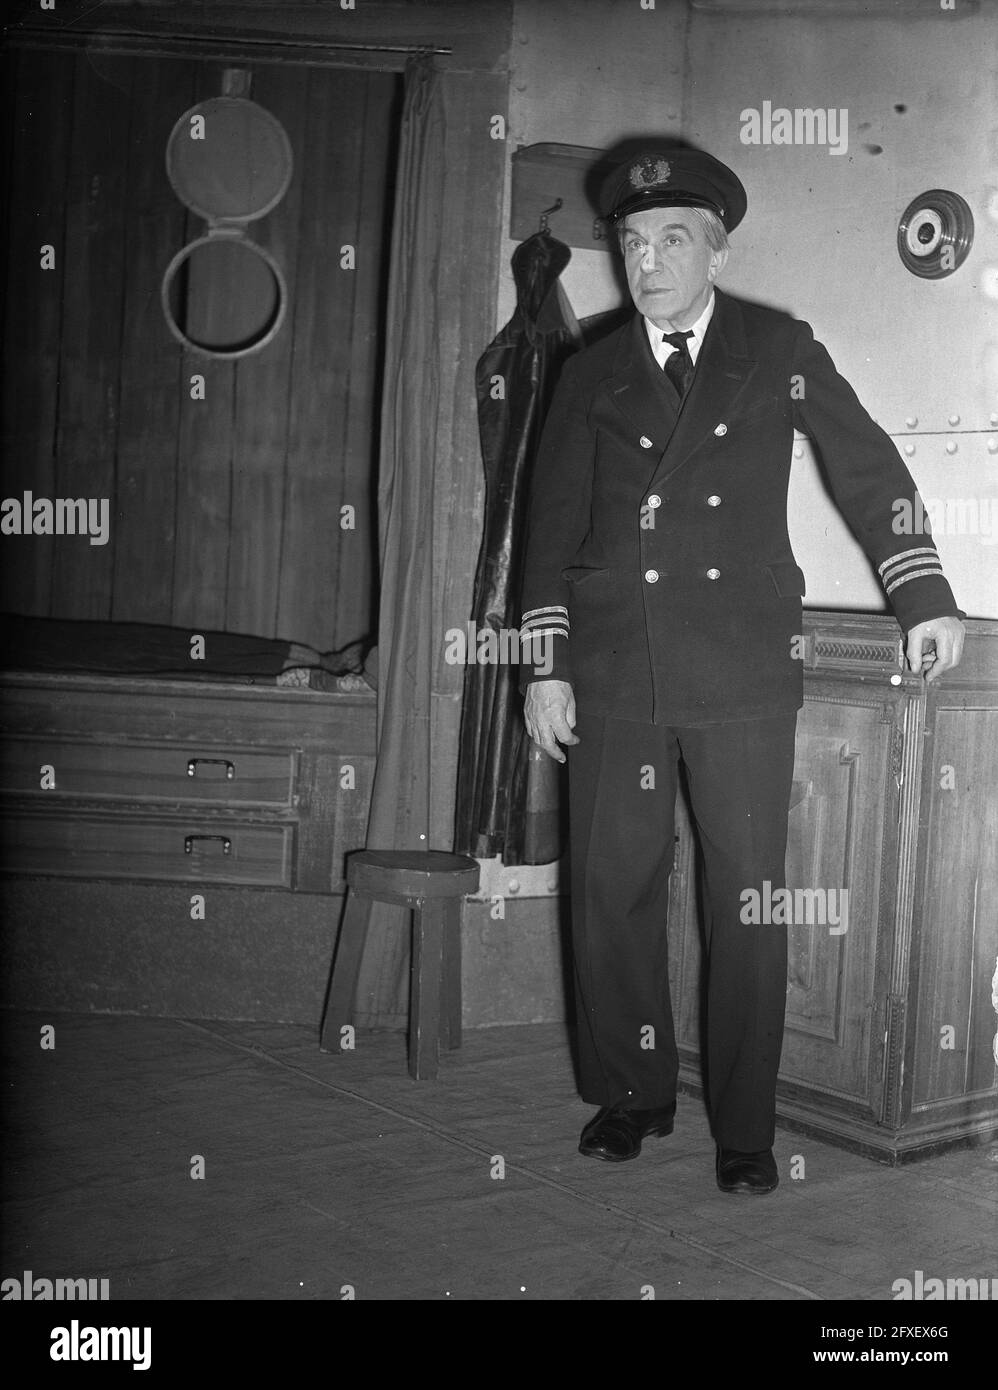 Theatre play Skipper next to God ( Cor van der Lugt Melsert ) in the De la Mar theater, 14 January 1948, The Netherlands, 20th century press agency photo, news to remember, documentary, historic photography 1945-1990, visual stories, human history of the Twentieth Century, capturing moments in time Stock Photo